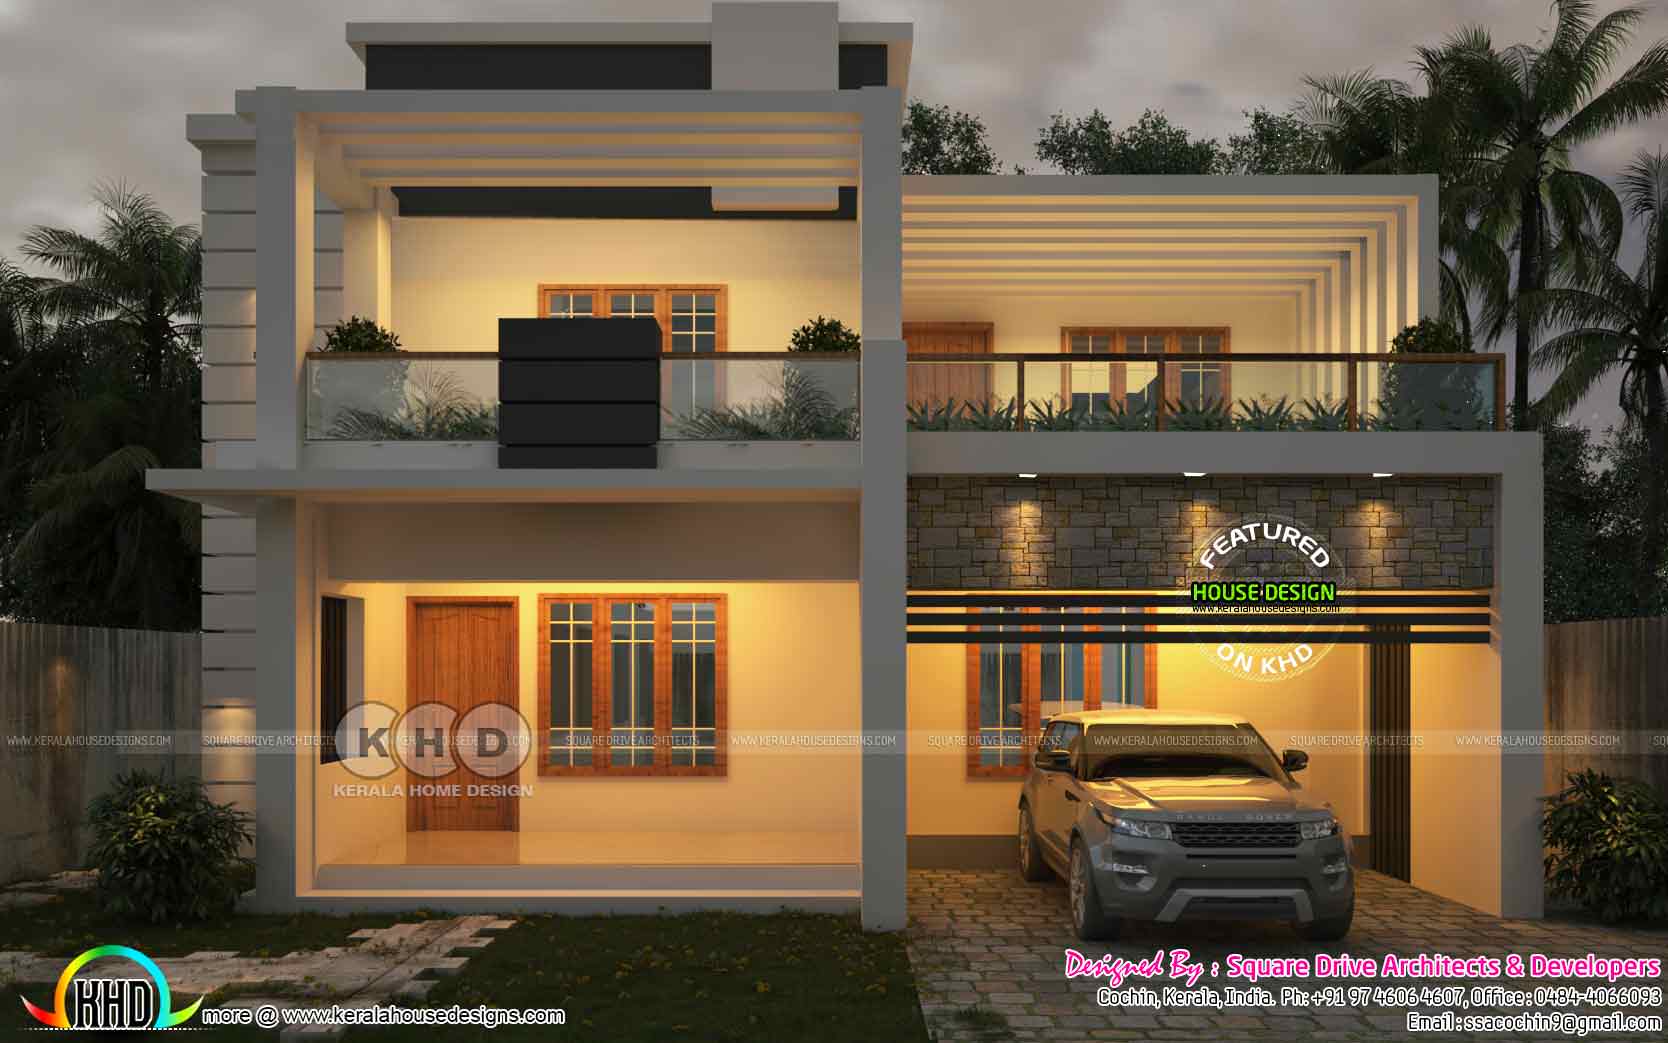 4 bedroom modern 2800 sq-ft house plan - Kerala home design and ...